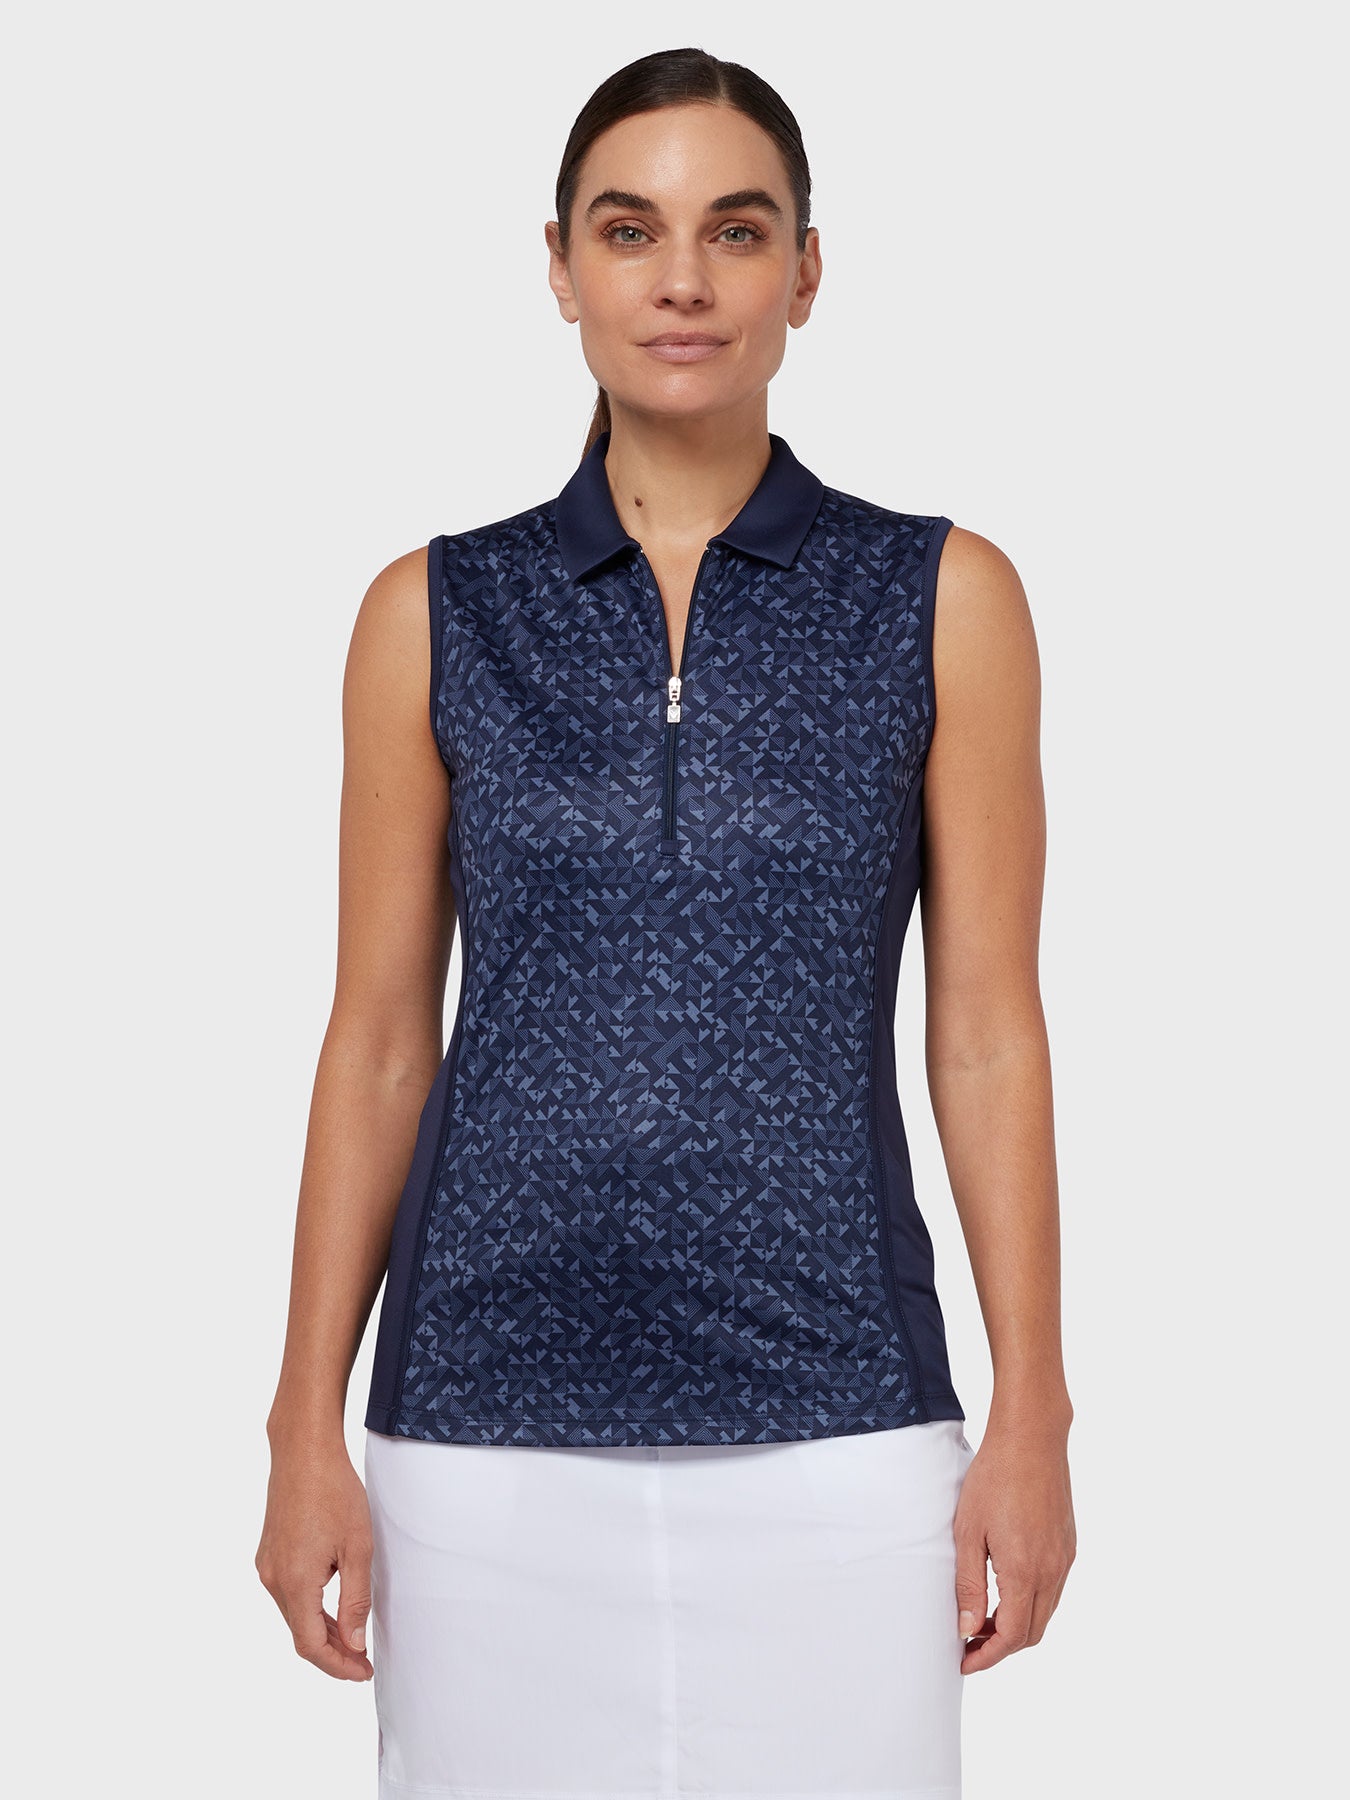 View Shape Shifter Geo Print Womens Golf Polo In Peacoat Peacoat XS information